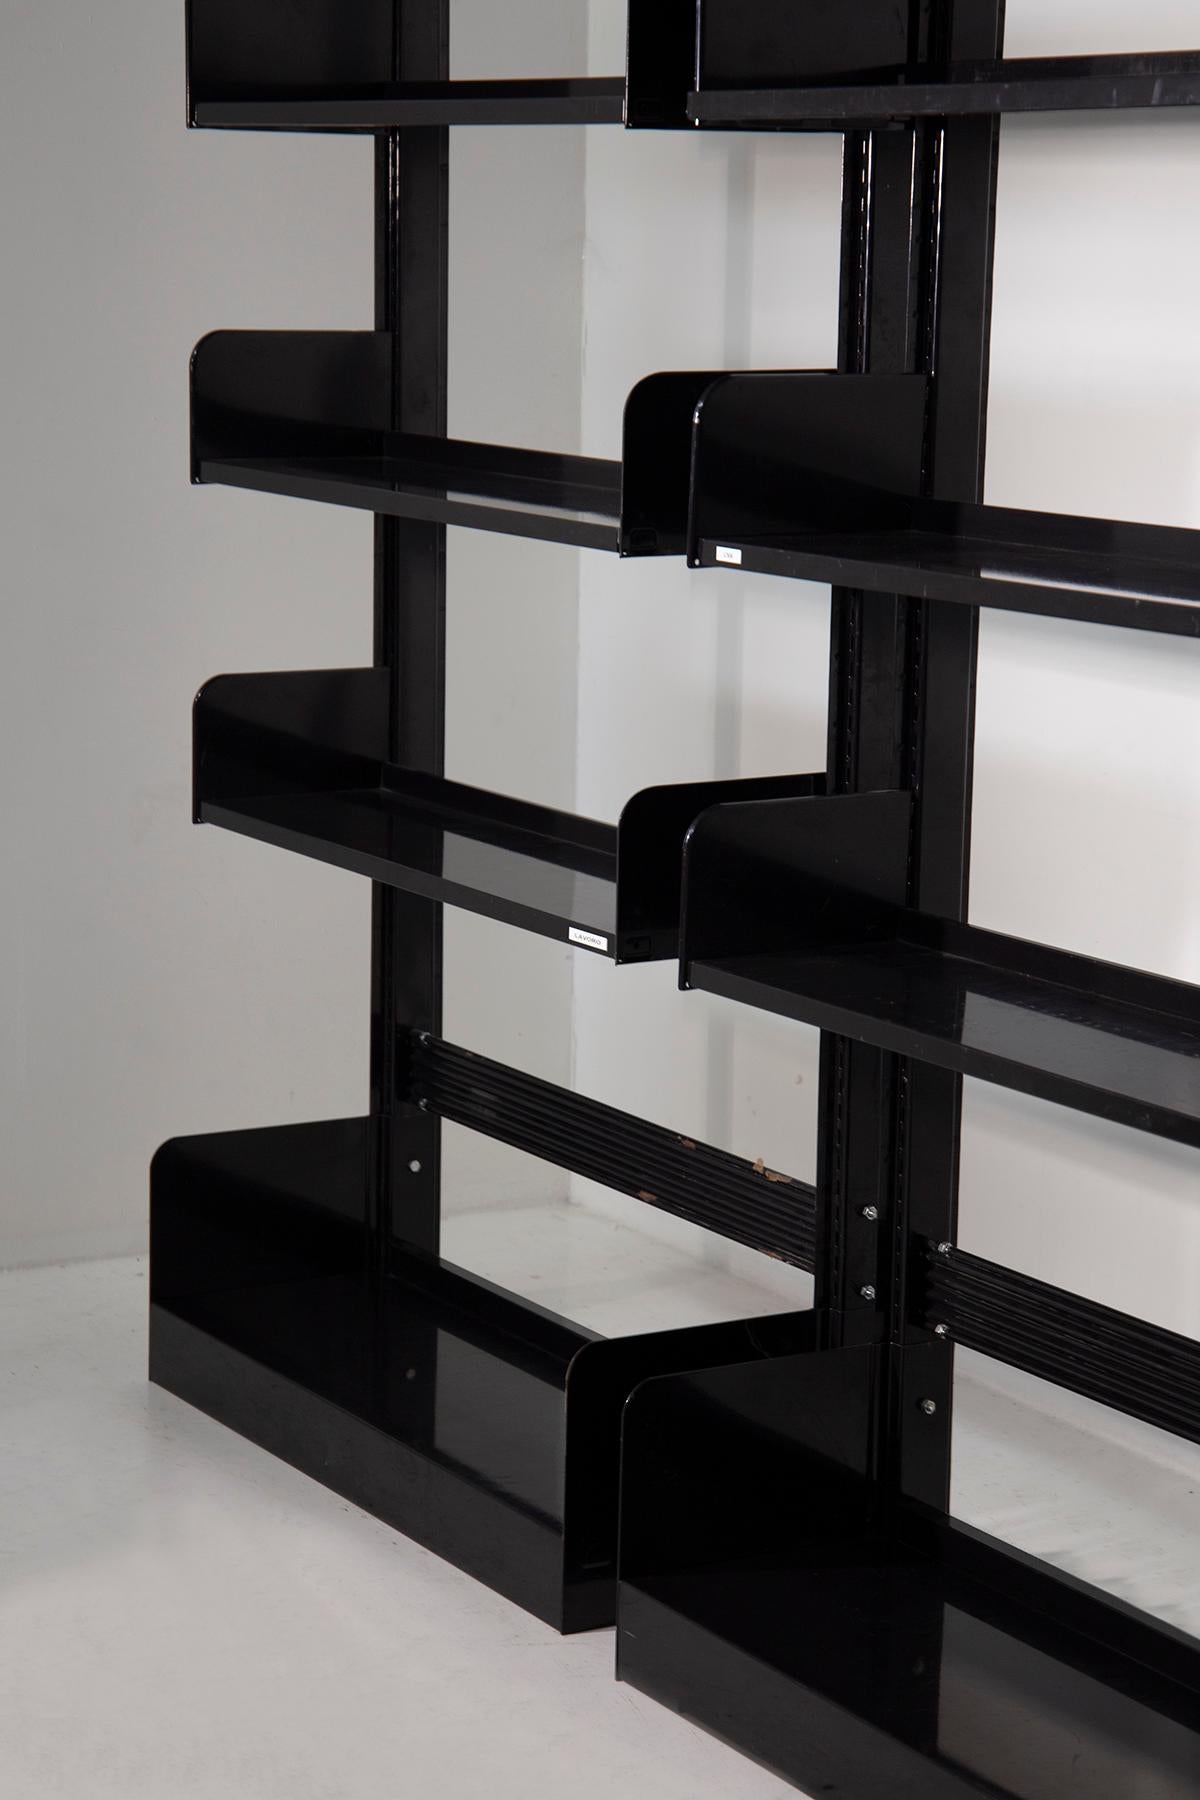 The trio of black Congress bookshelves by Lips Vago from the 1960s exudes an aura of timeless sophistication and functional elegance. These bookshelves, crafted from sleek black-painted metal, stand as iconic symbols of design ingenuity and